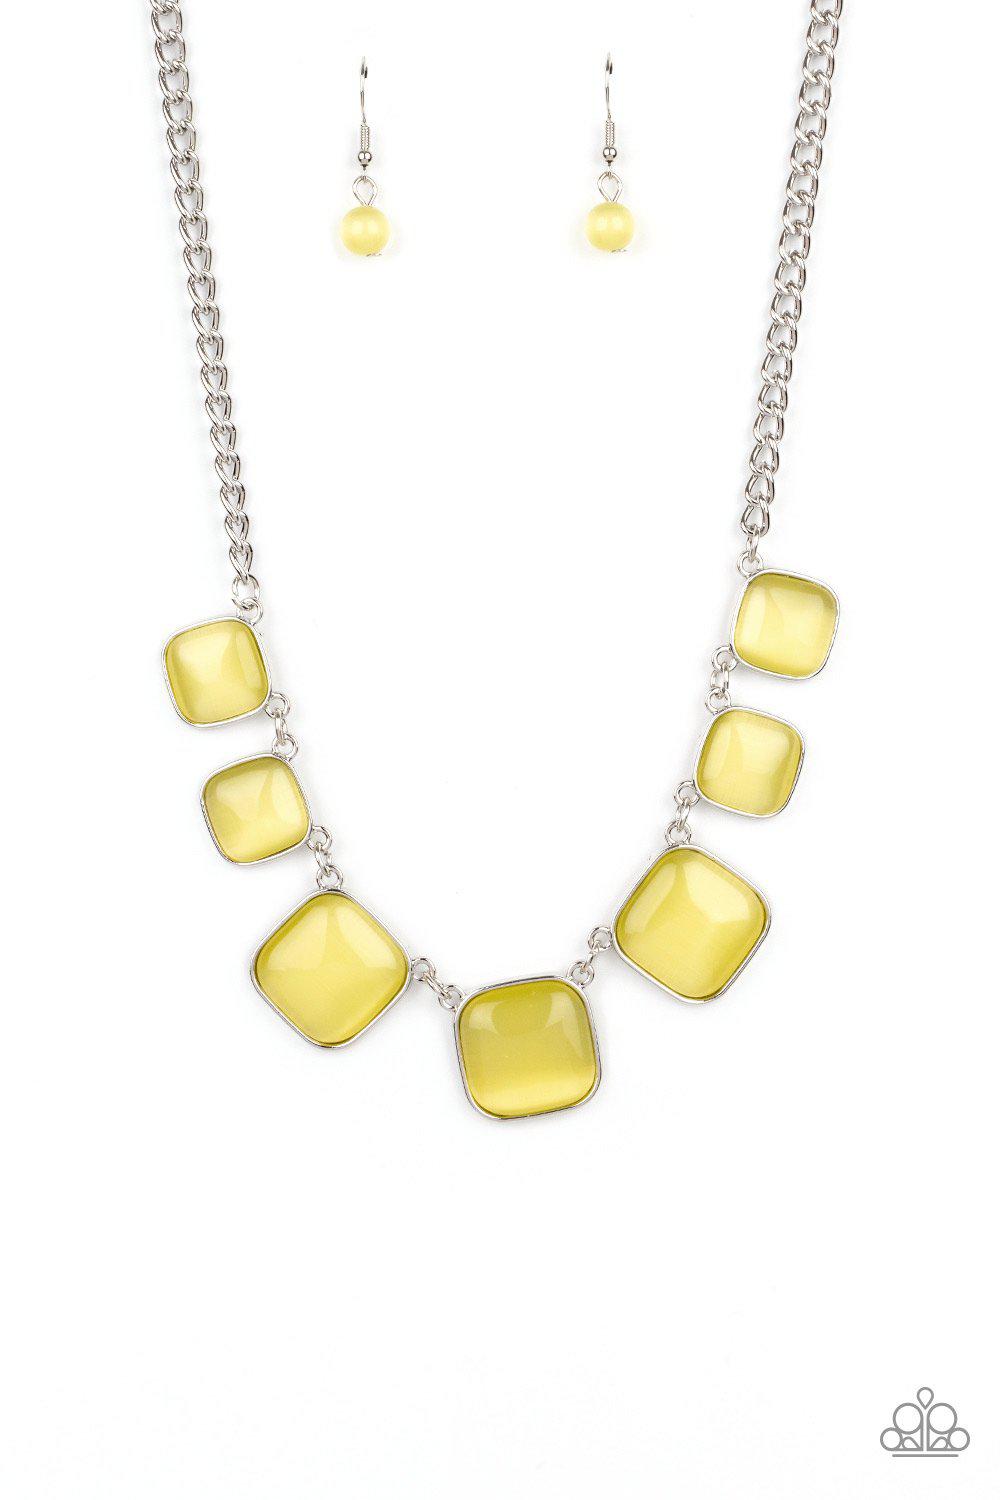 Aura Allure Yellow Cat's Eye Stone Necklace - Paparazzi Accessories- lightbox - CarasShop.com - $5 Jewelry by Cara Jewels